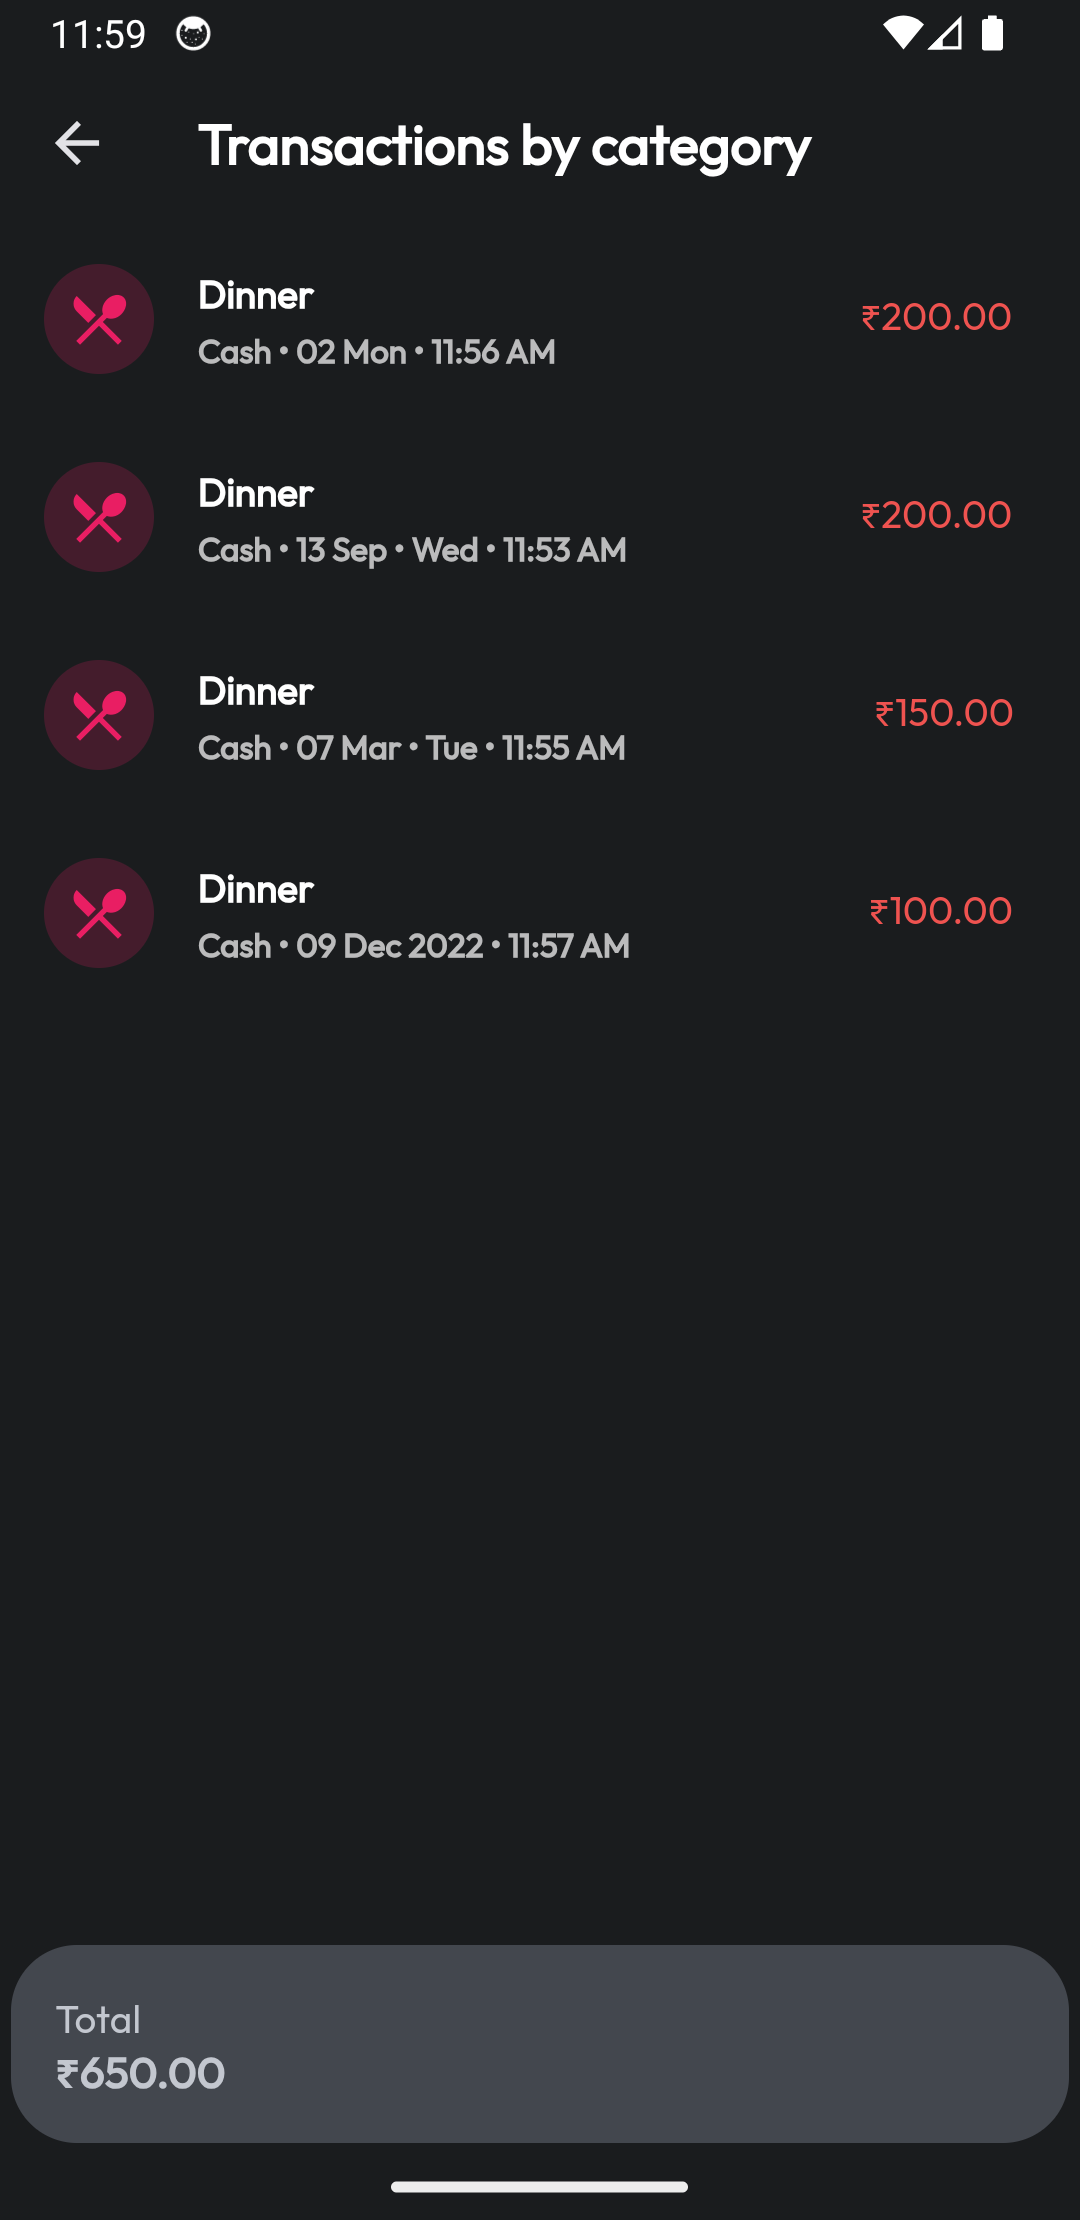 Old Transaction View